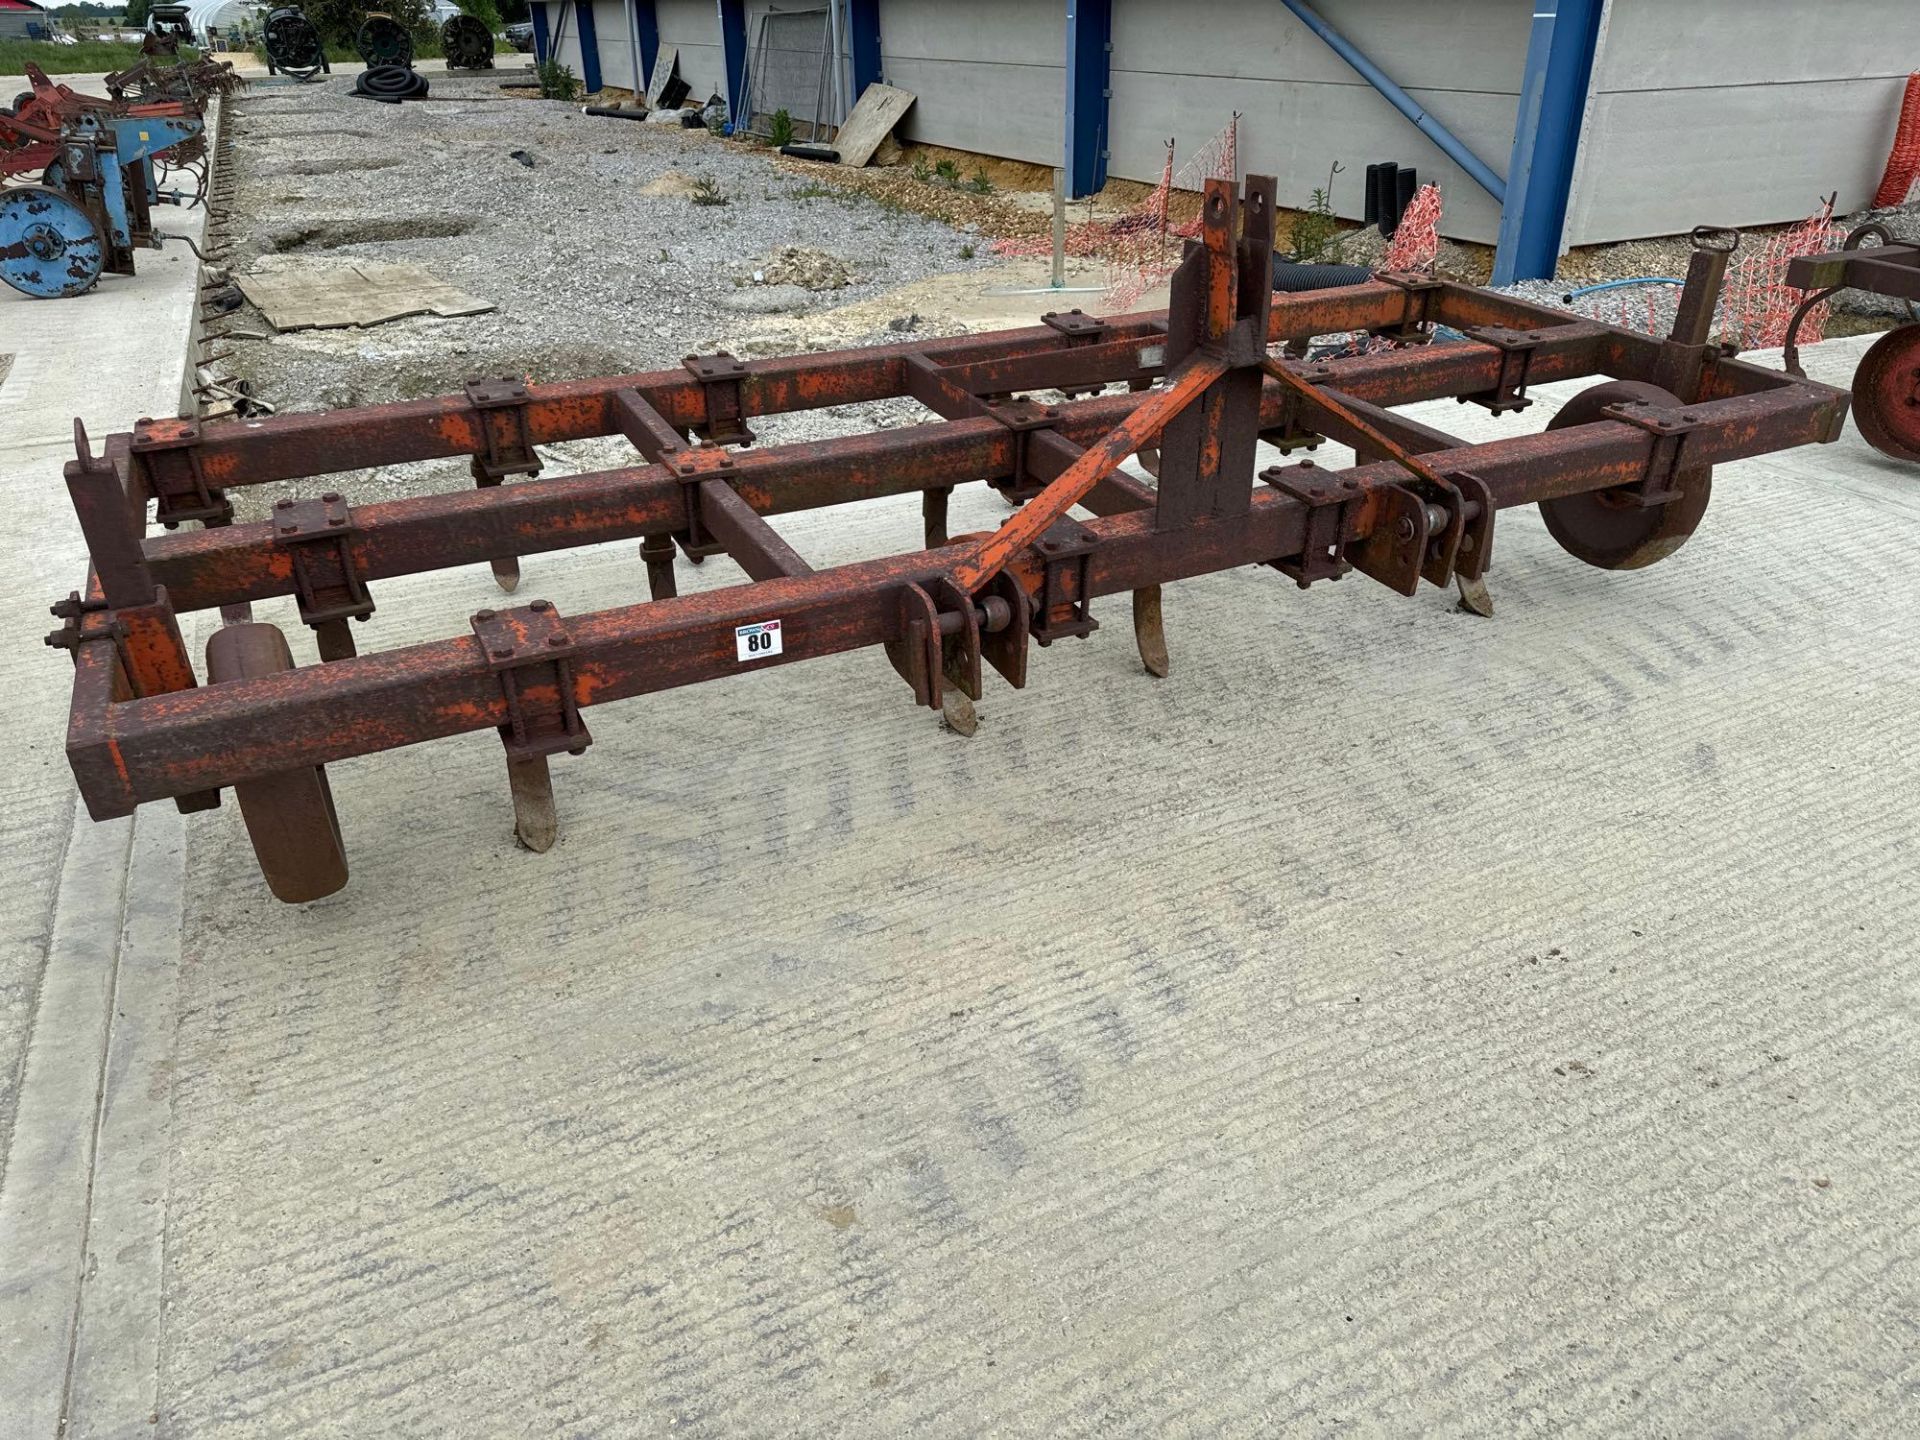 Browns 12ft c-tine cultivator. Serial No: PBMC9238/1